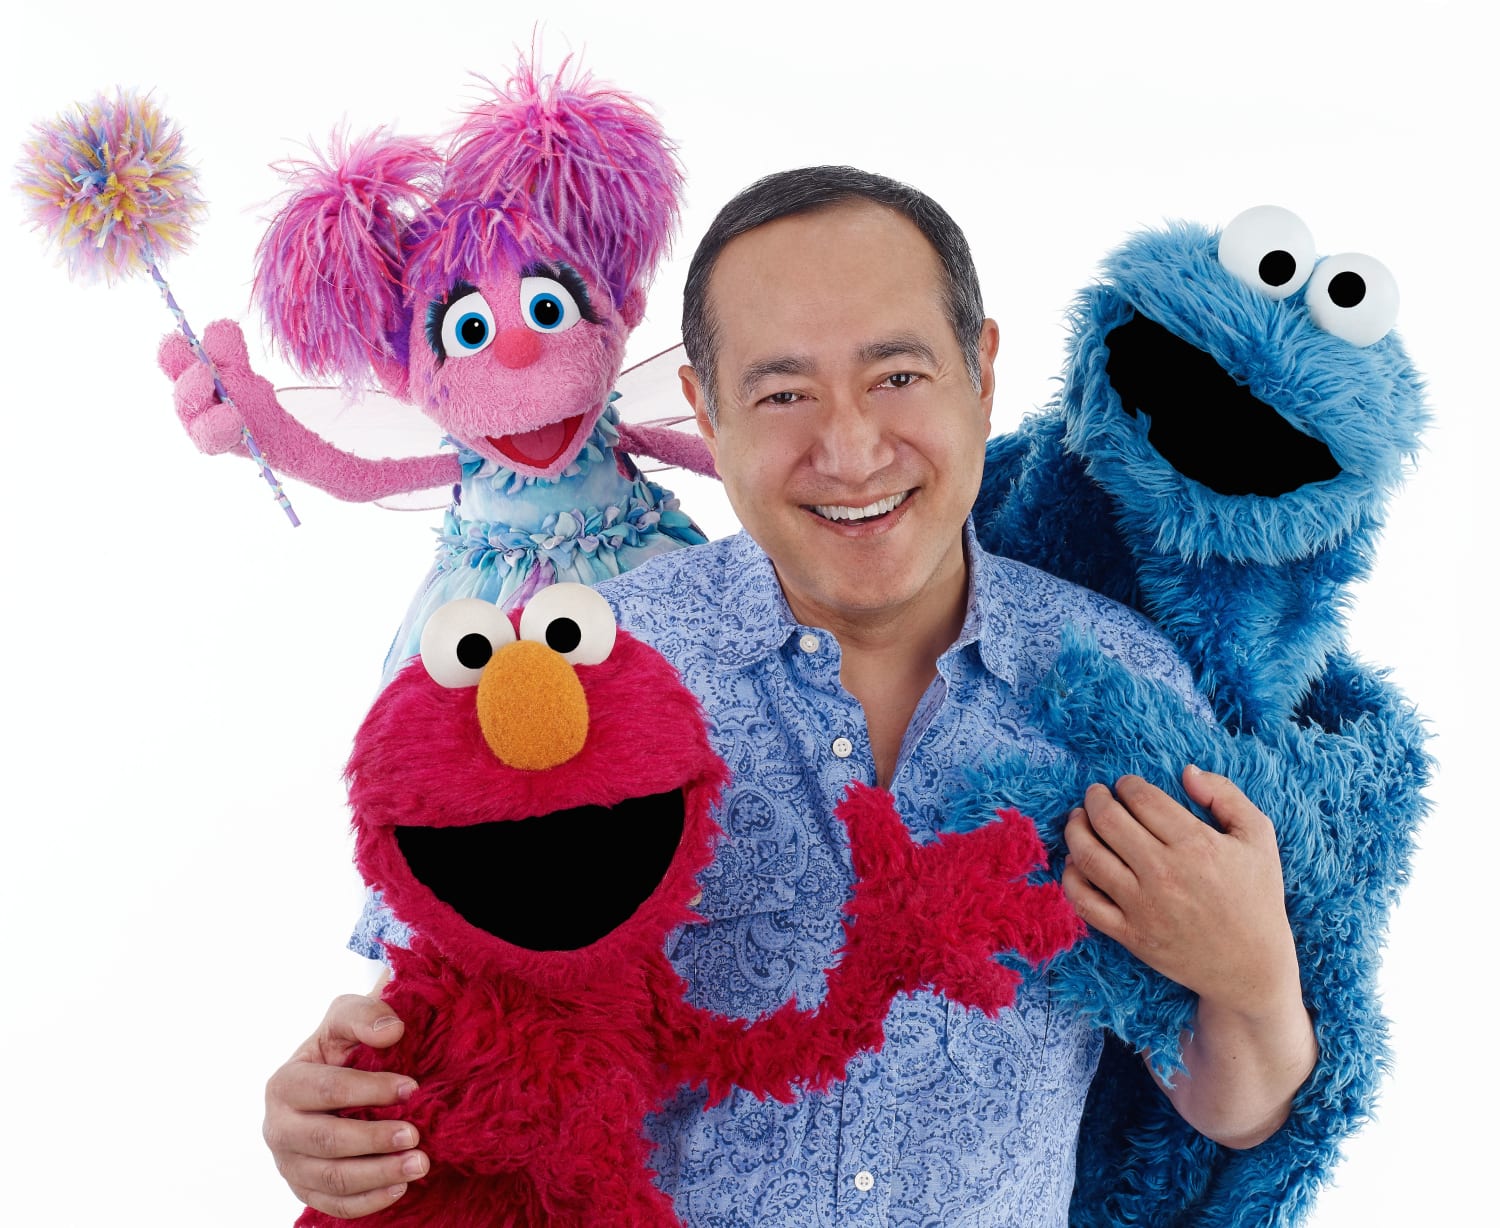 From Broadway to Big Bird: Behind the Scenes With Sesame Street's